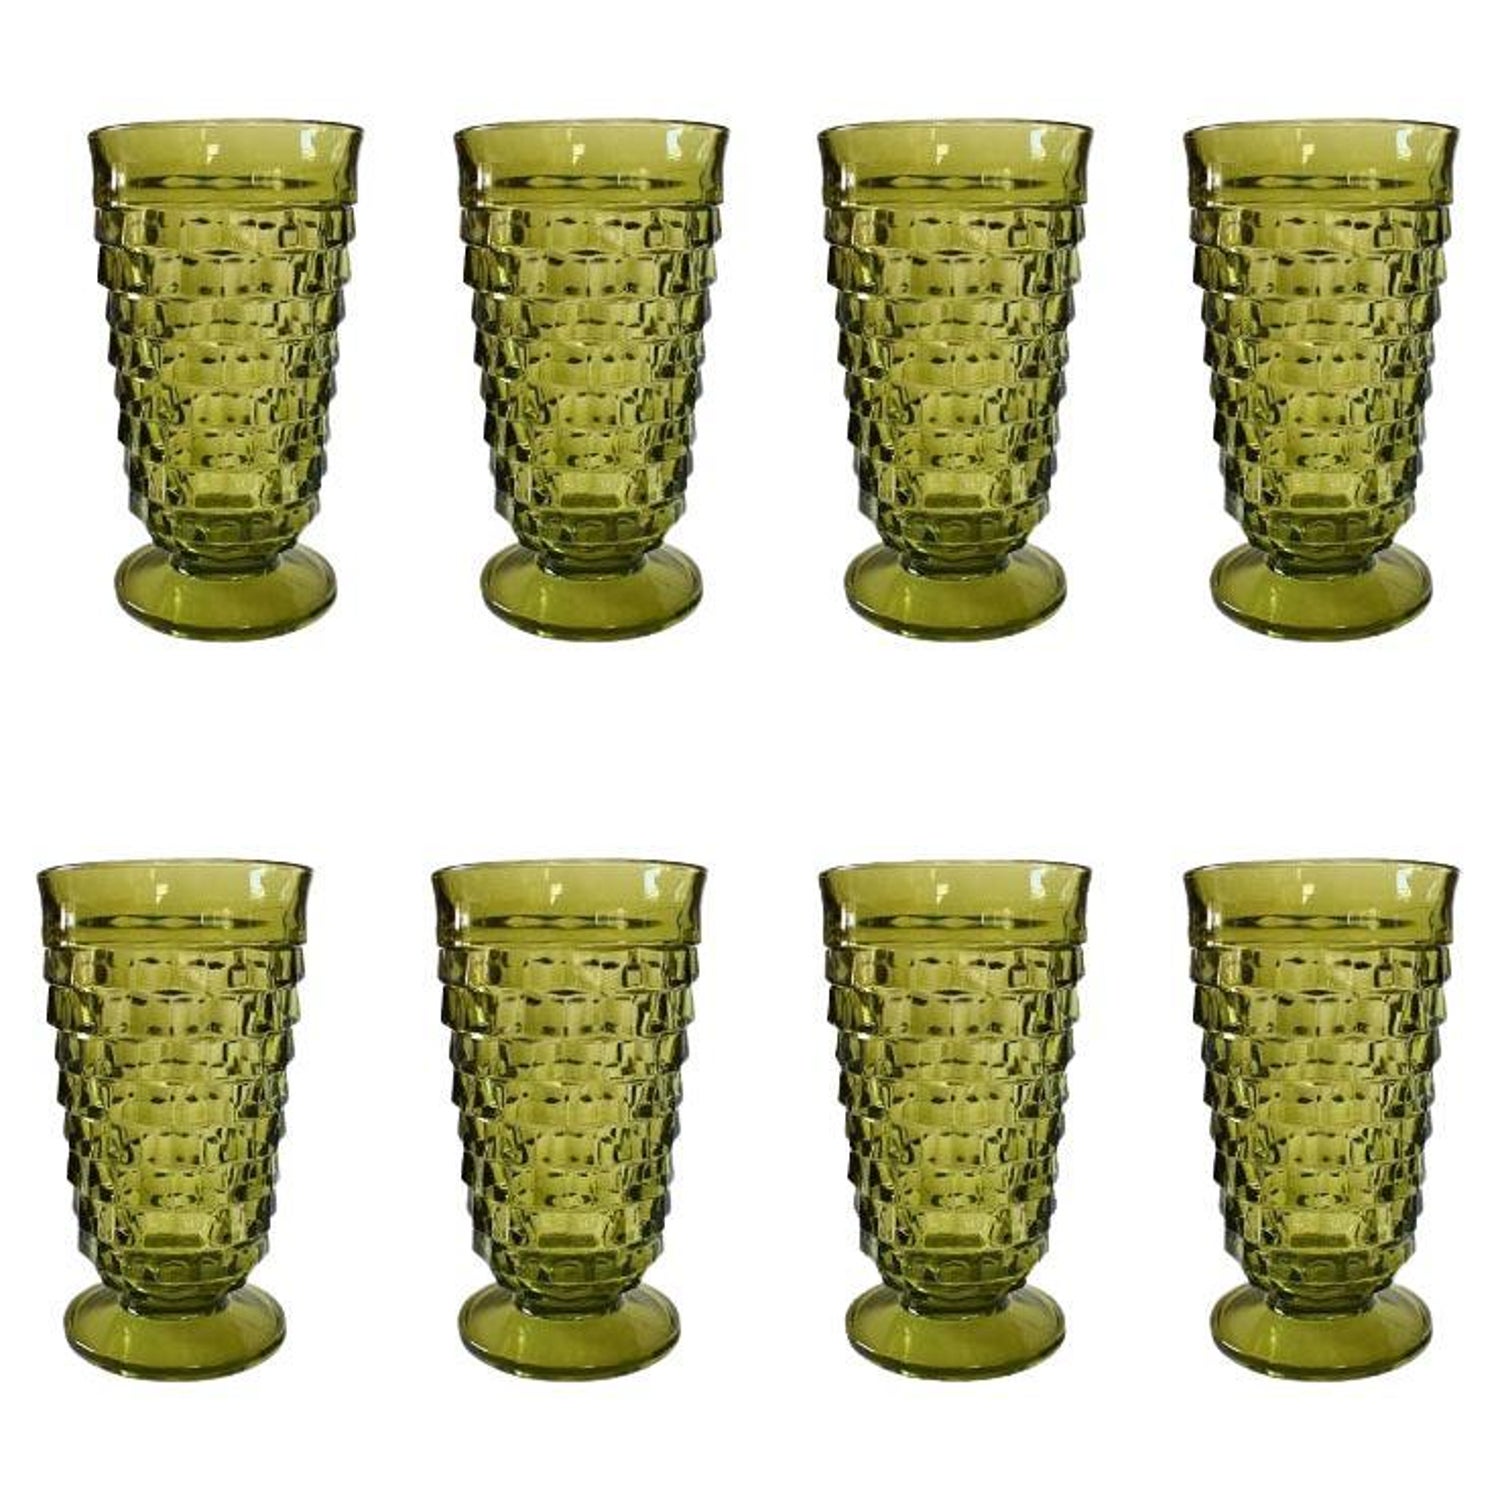 https://a.1stdibscdn.com/mid-century-modern-green-faceted-indiana-glass-drinking-glasses-set-of-8-for-sale/f_33823/f_319162621672057037114/f_31916262_1672057037307_bg_processed.jpg?width=1500